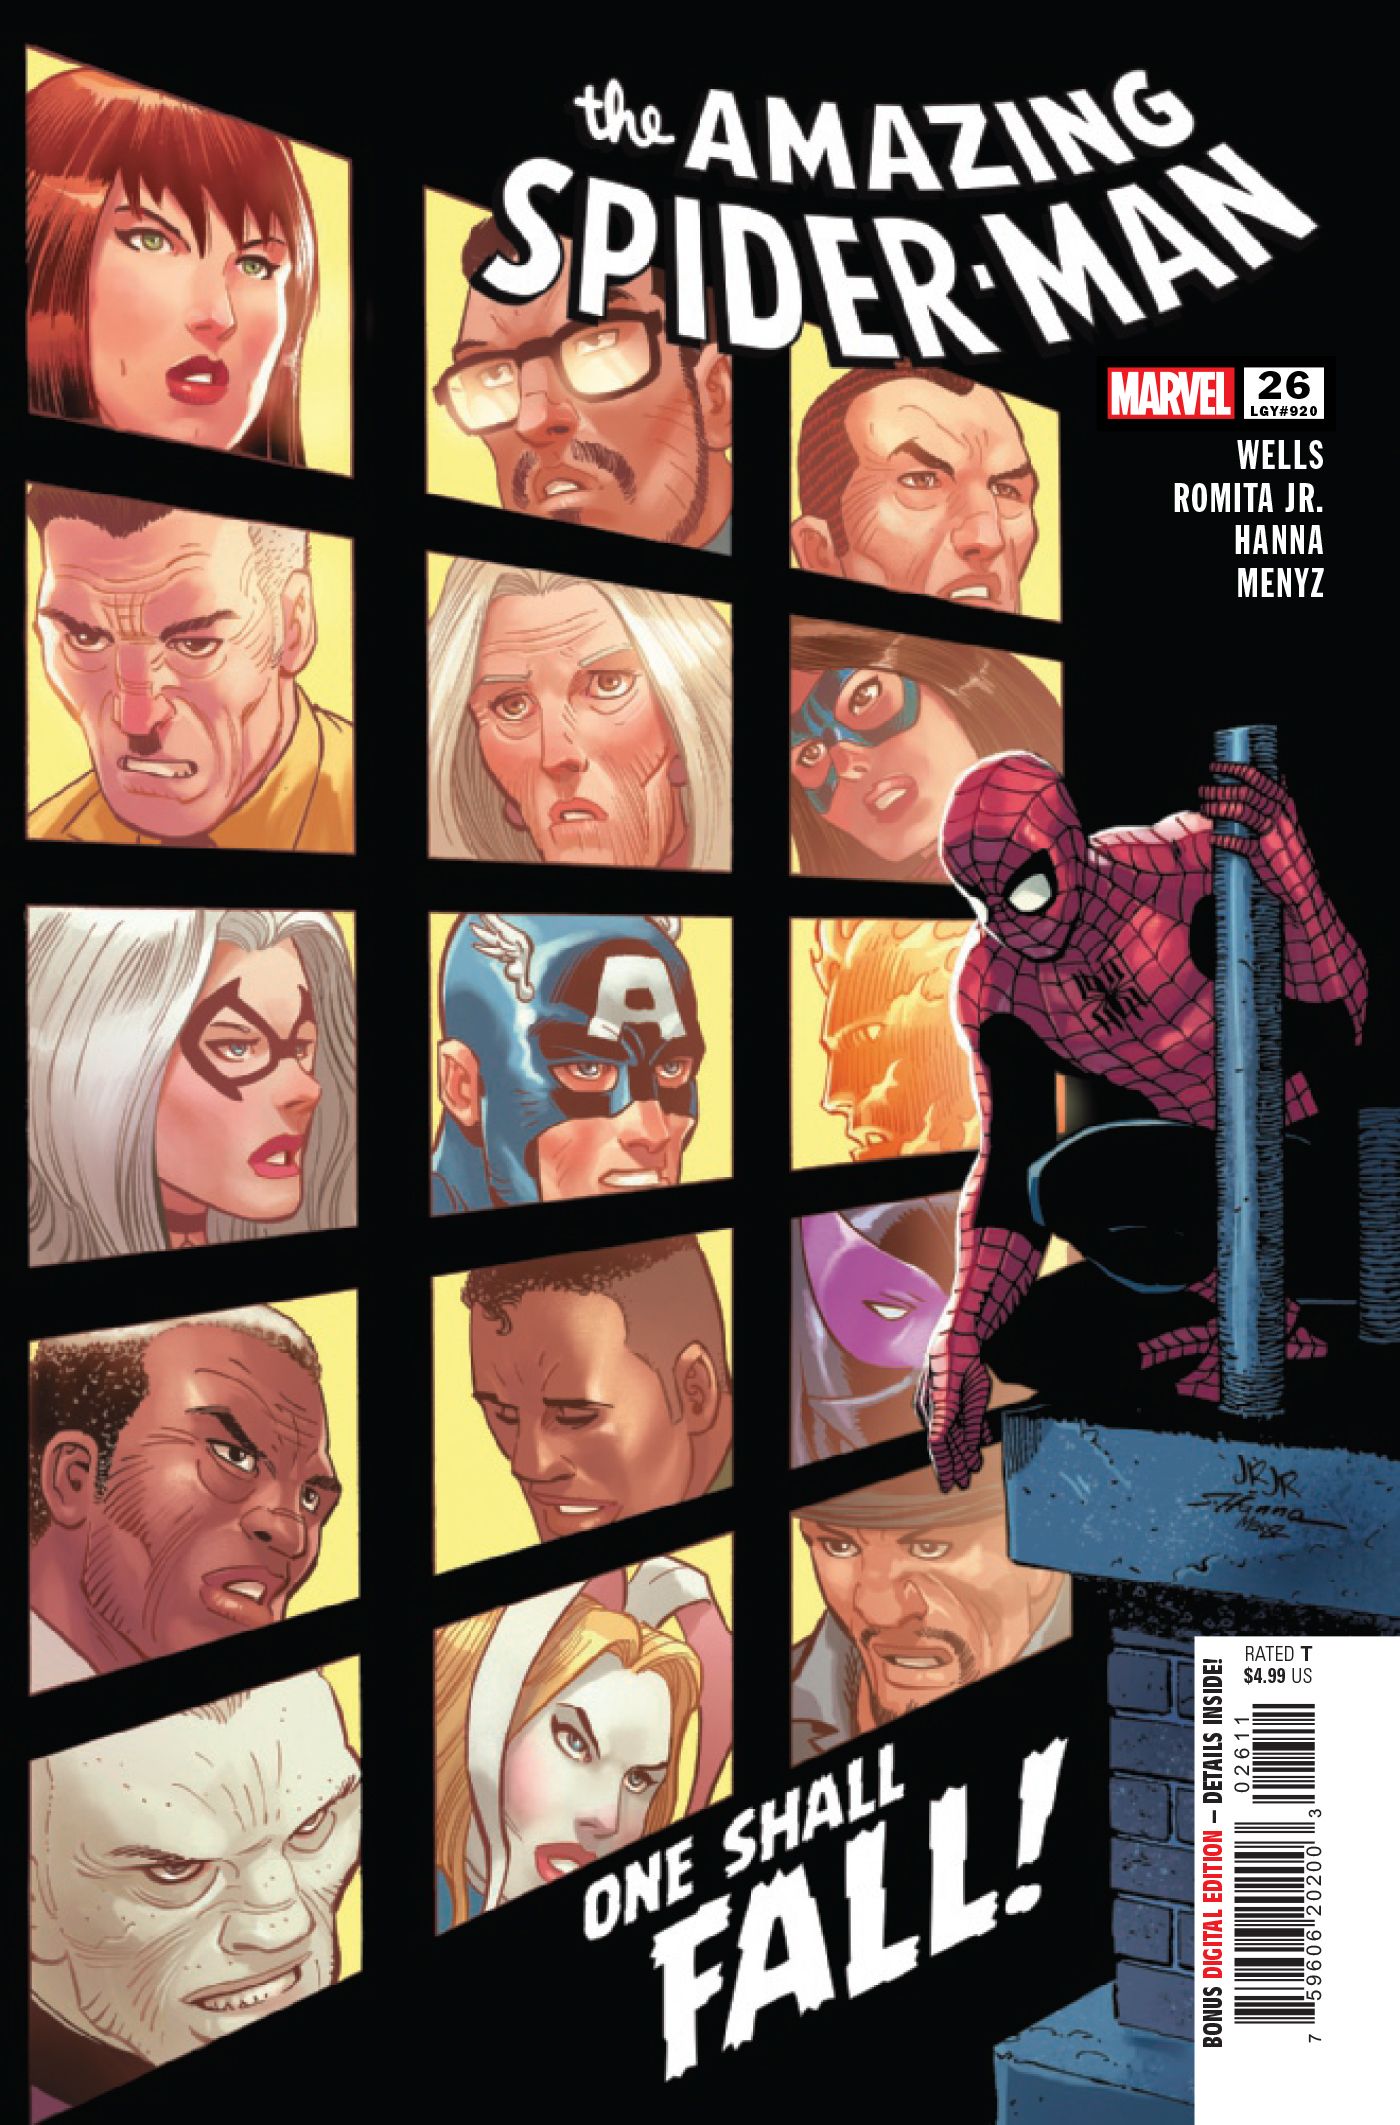 An early look at Amazing Spider-Man #26 (2023) from Marvel Comics.